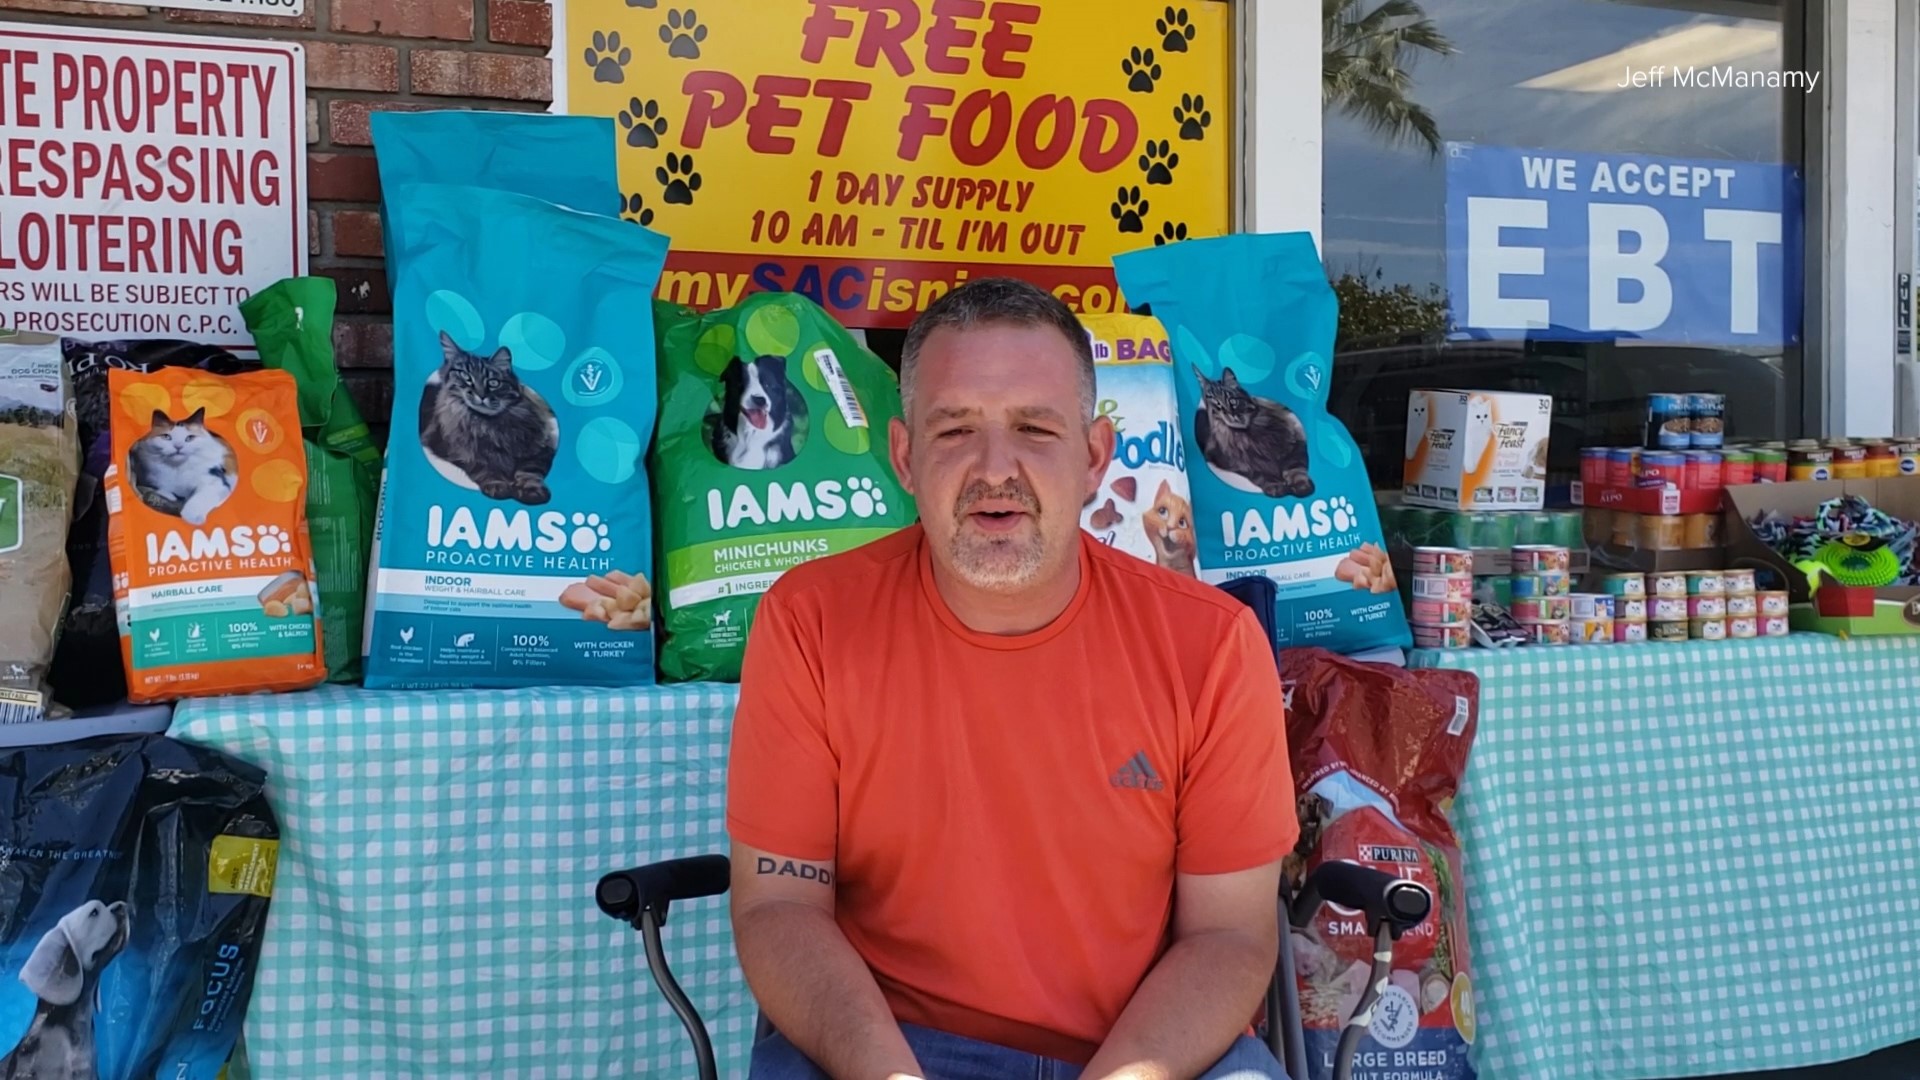 Today's Everyday Hero: Jeff McManamy’s gift to struggling pet owners is providing free food in the Sacramento area.